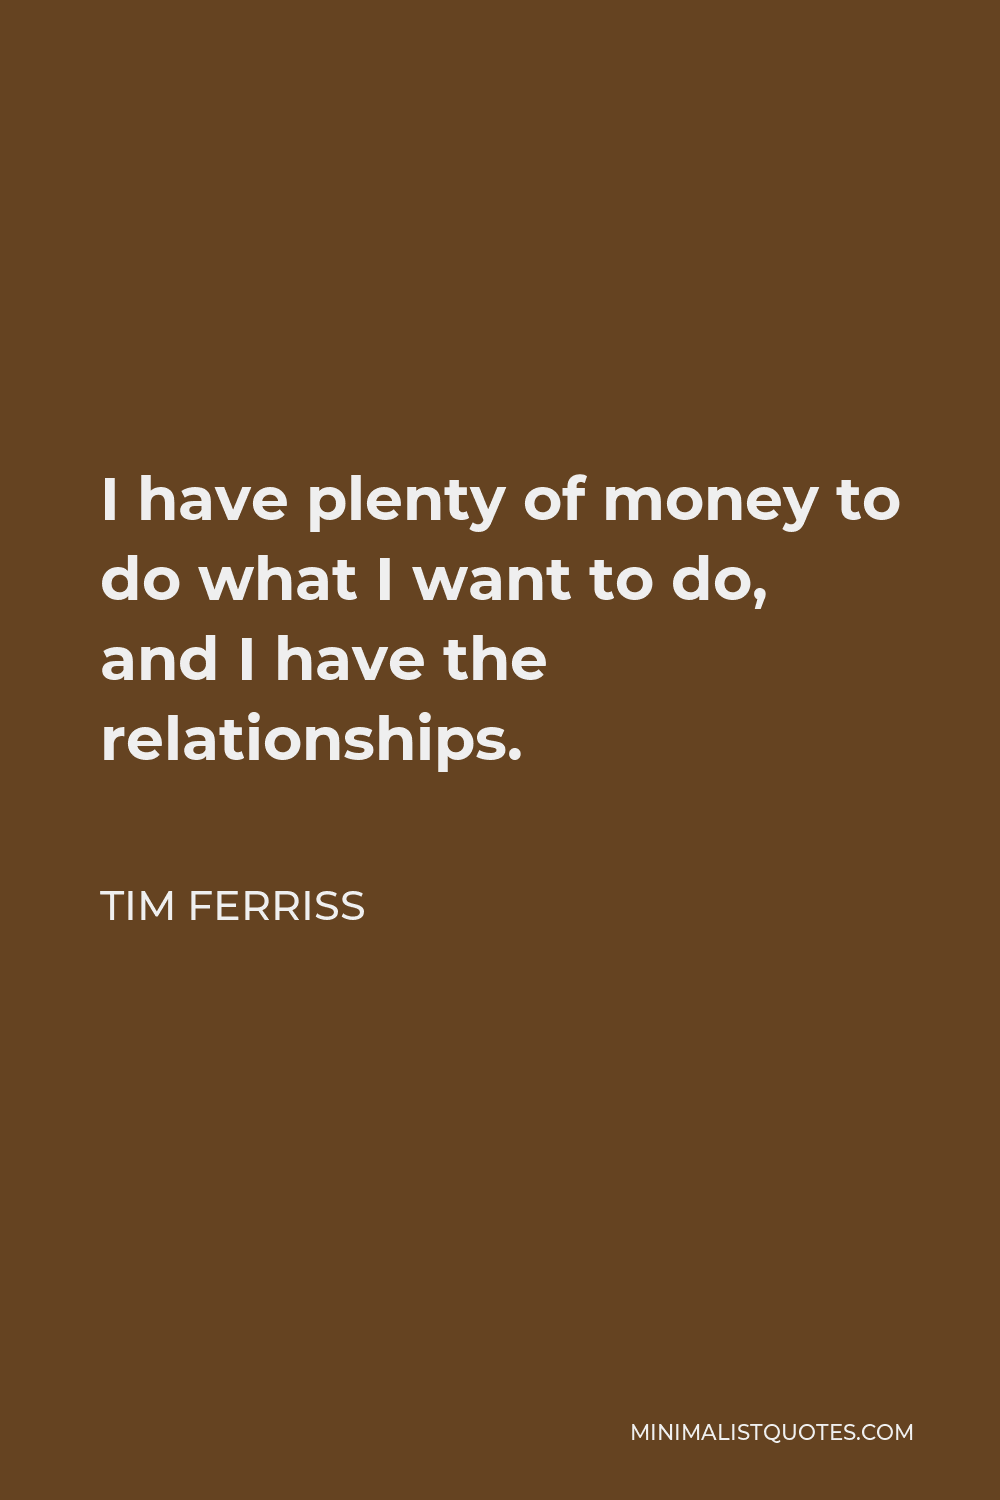 Tim Ferriss Quote - I have plenty of money to do what I want to do, and I have the relationships.